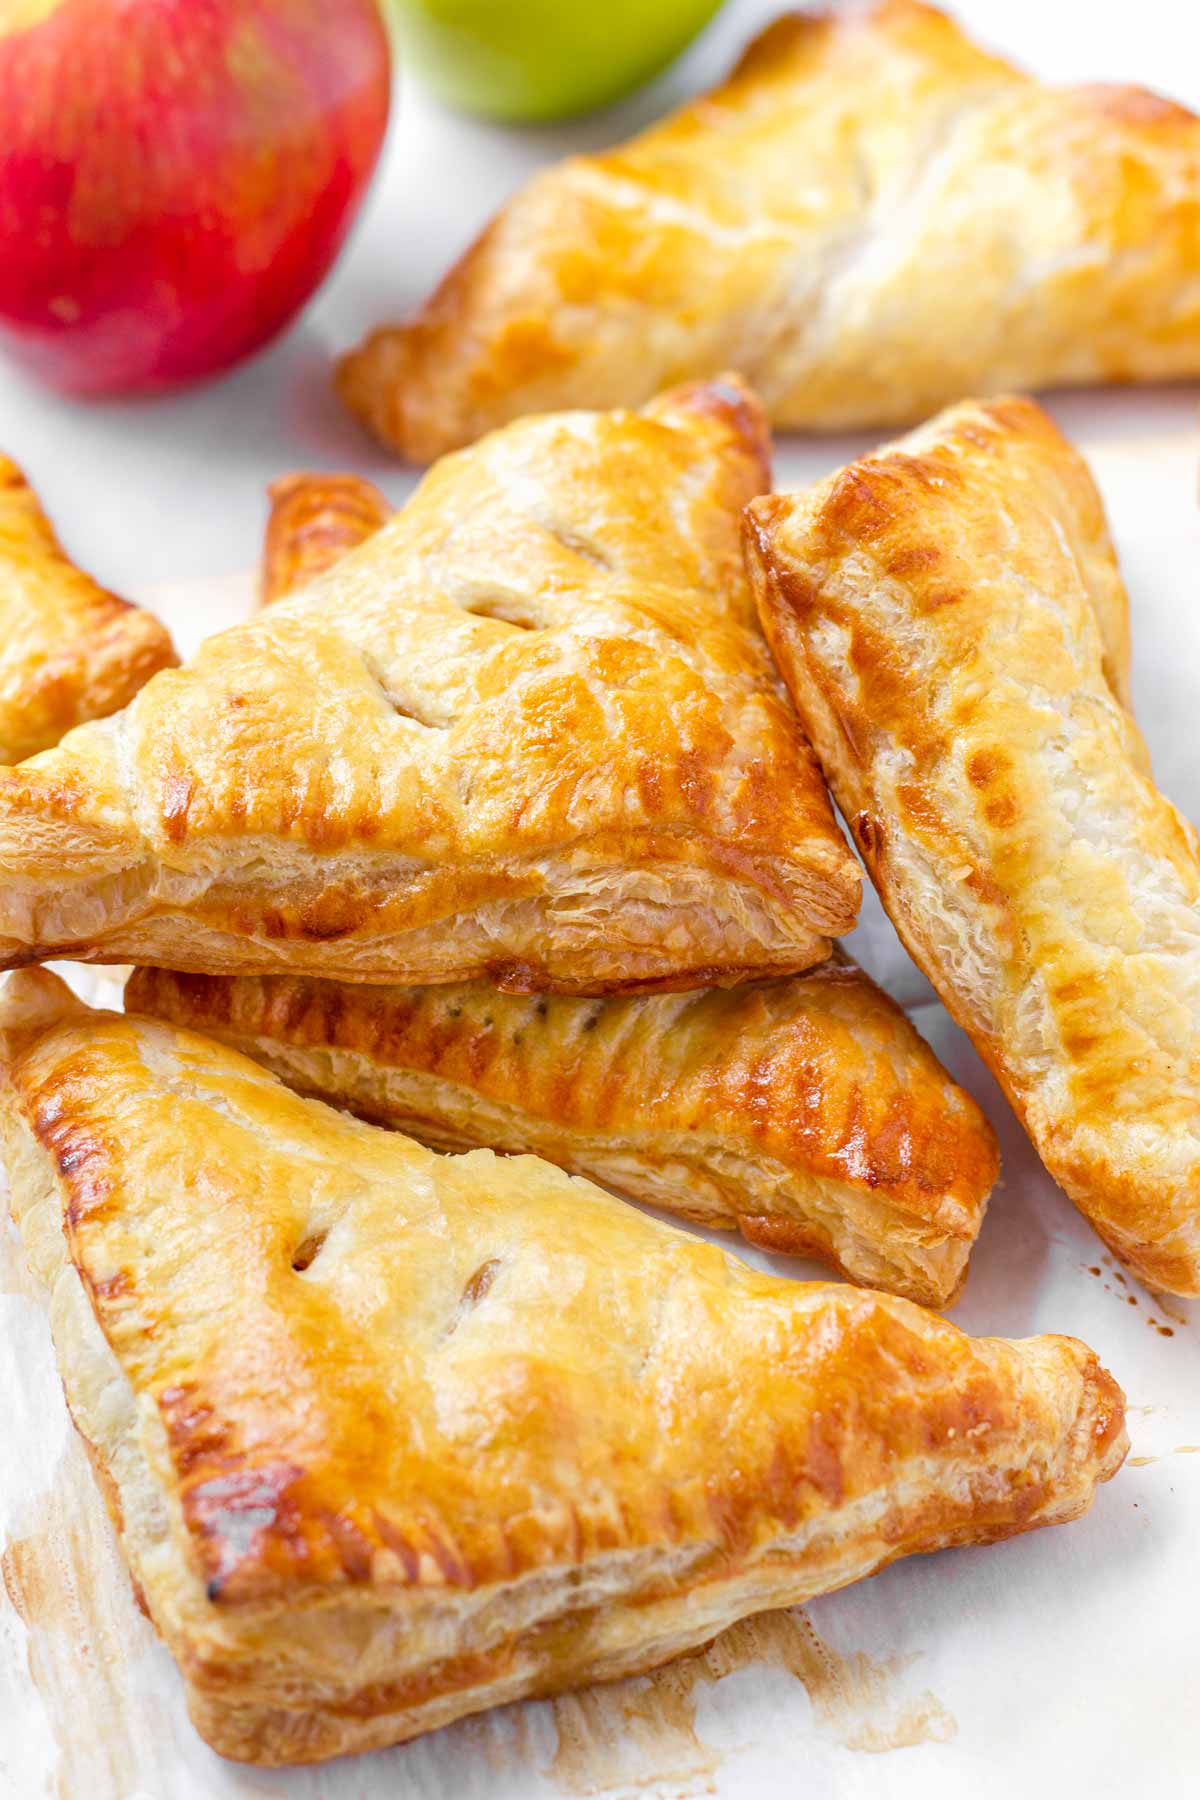 https://cookingformysoul.com/wp-content/uploads/2022/10/puff-pastry-apple-turnovers-1-min.jpg